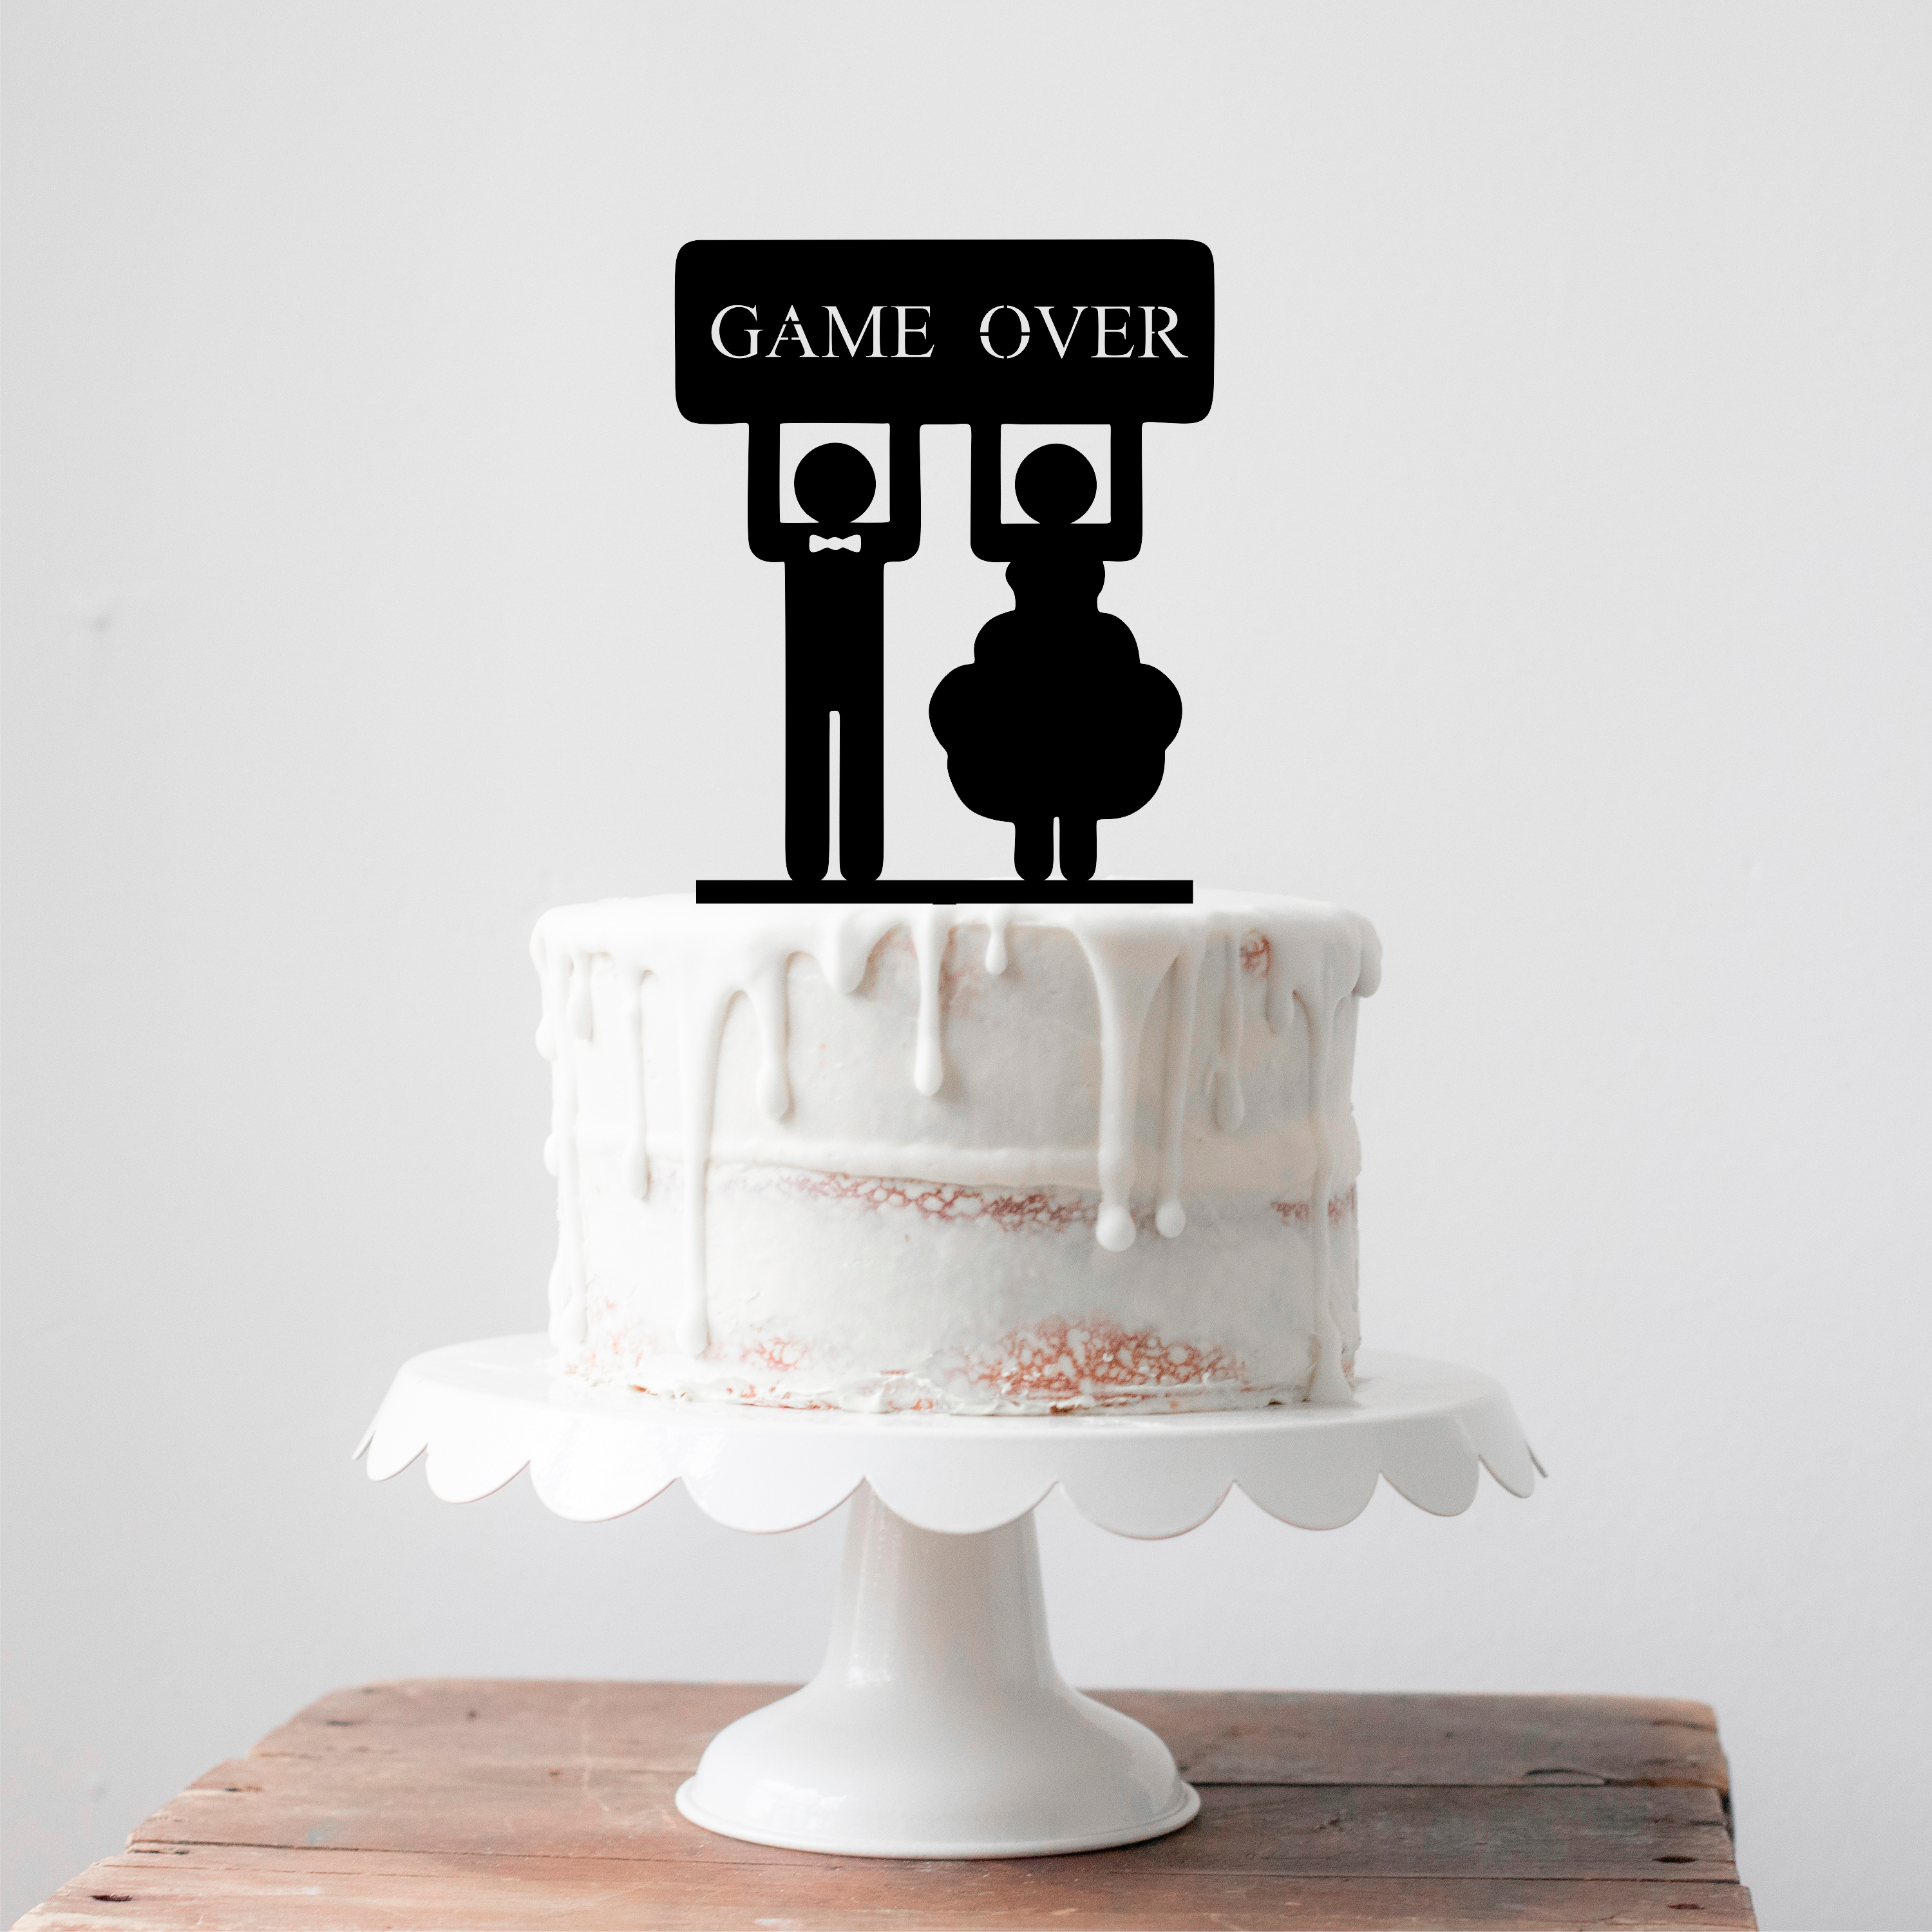 Wedding Cake Topper - Game Over Cake Topper - Wood (MDF) or Acrylic - Wood Cake Topper - Acrylic Cake Topper - Wedding - Cake - Topper - Option 2